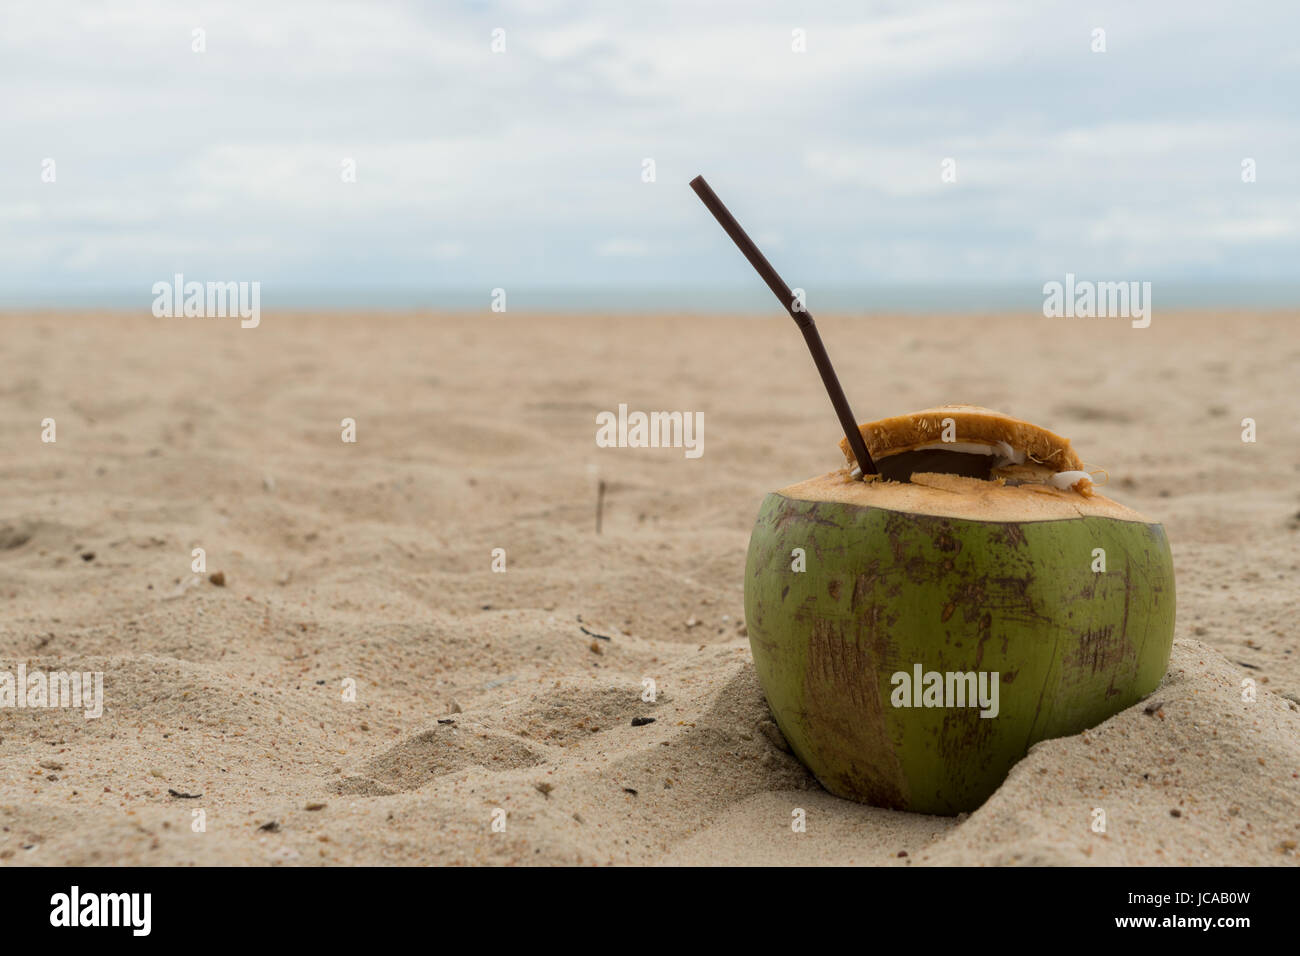 coconut drink relax rest holiday beach sand Stock Photo